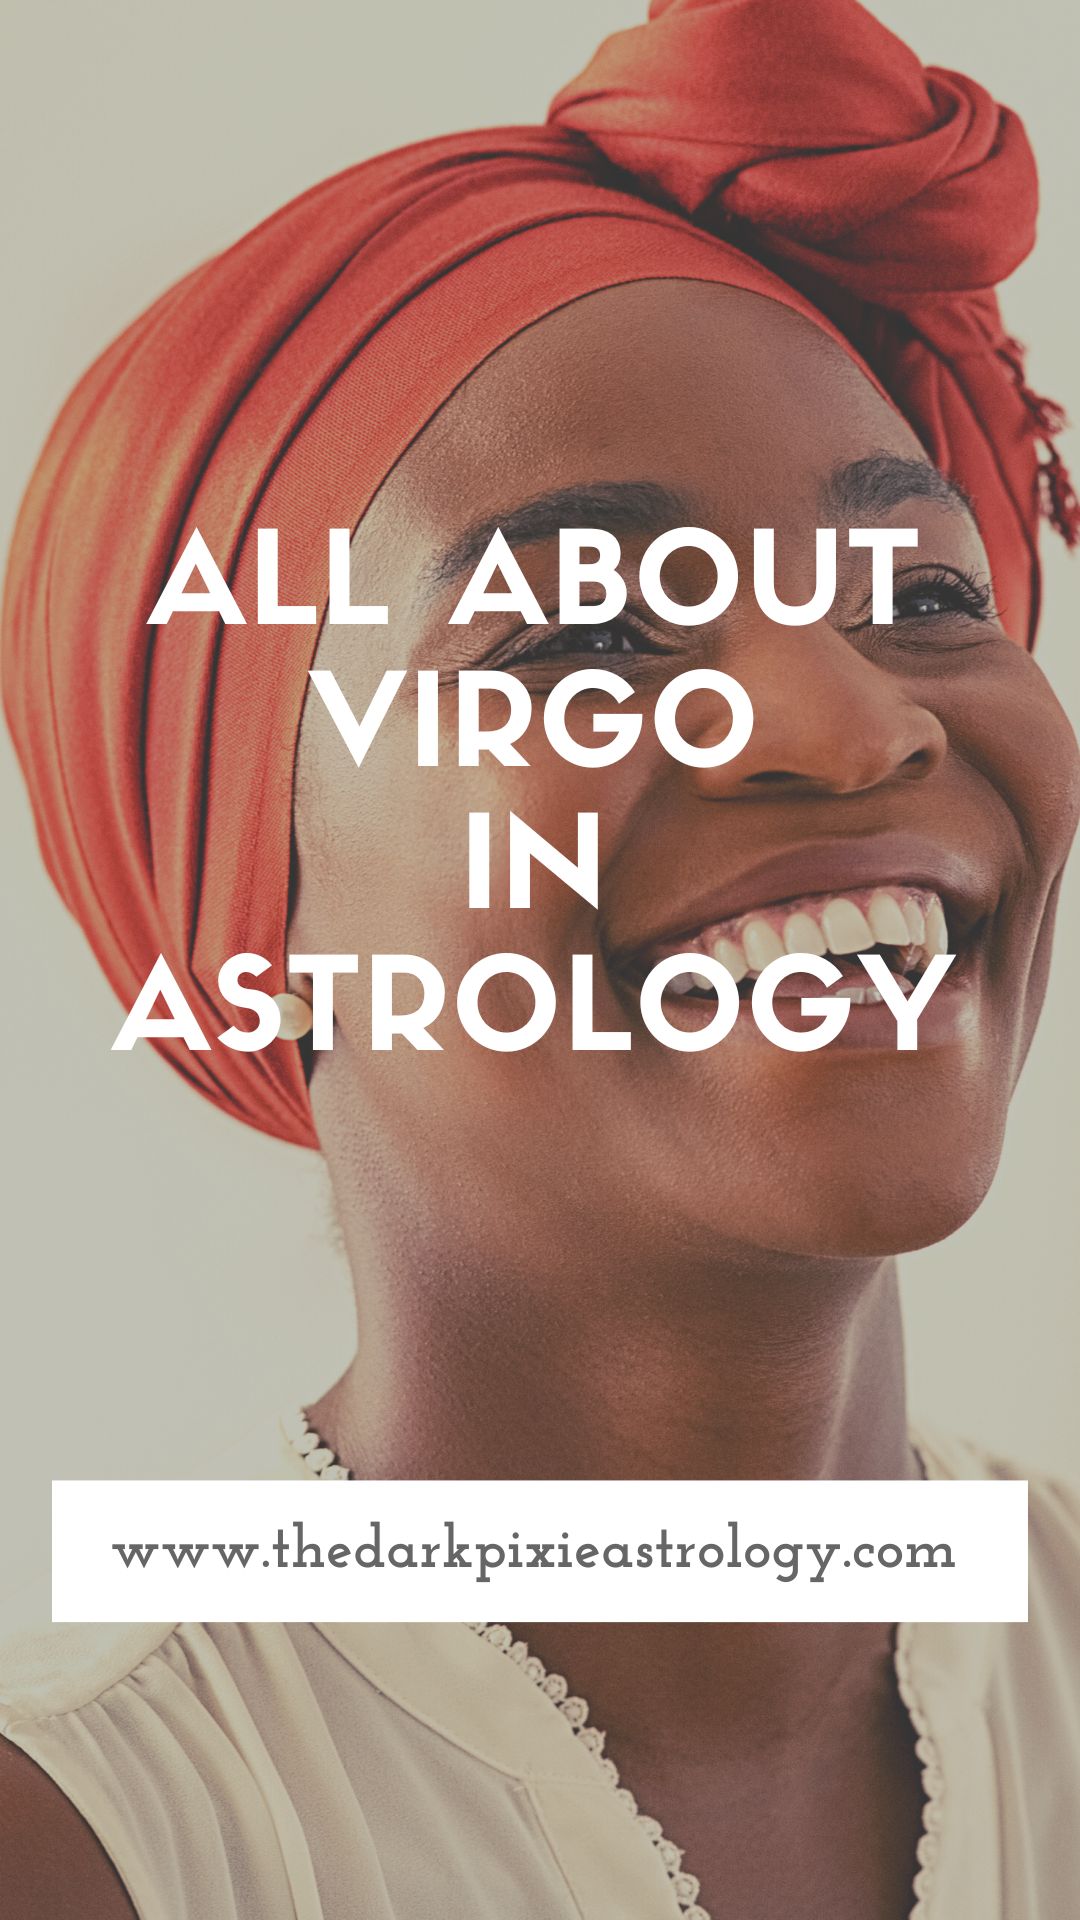 All About Virgo in Astrology - The Dark Pixie Astrology